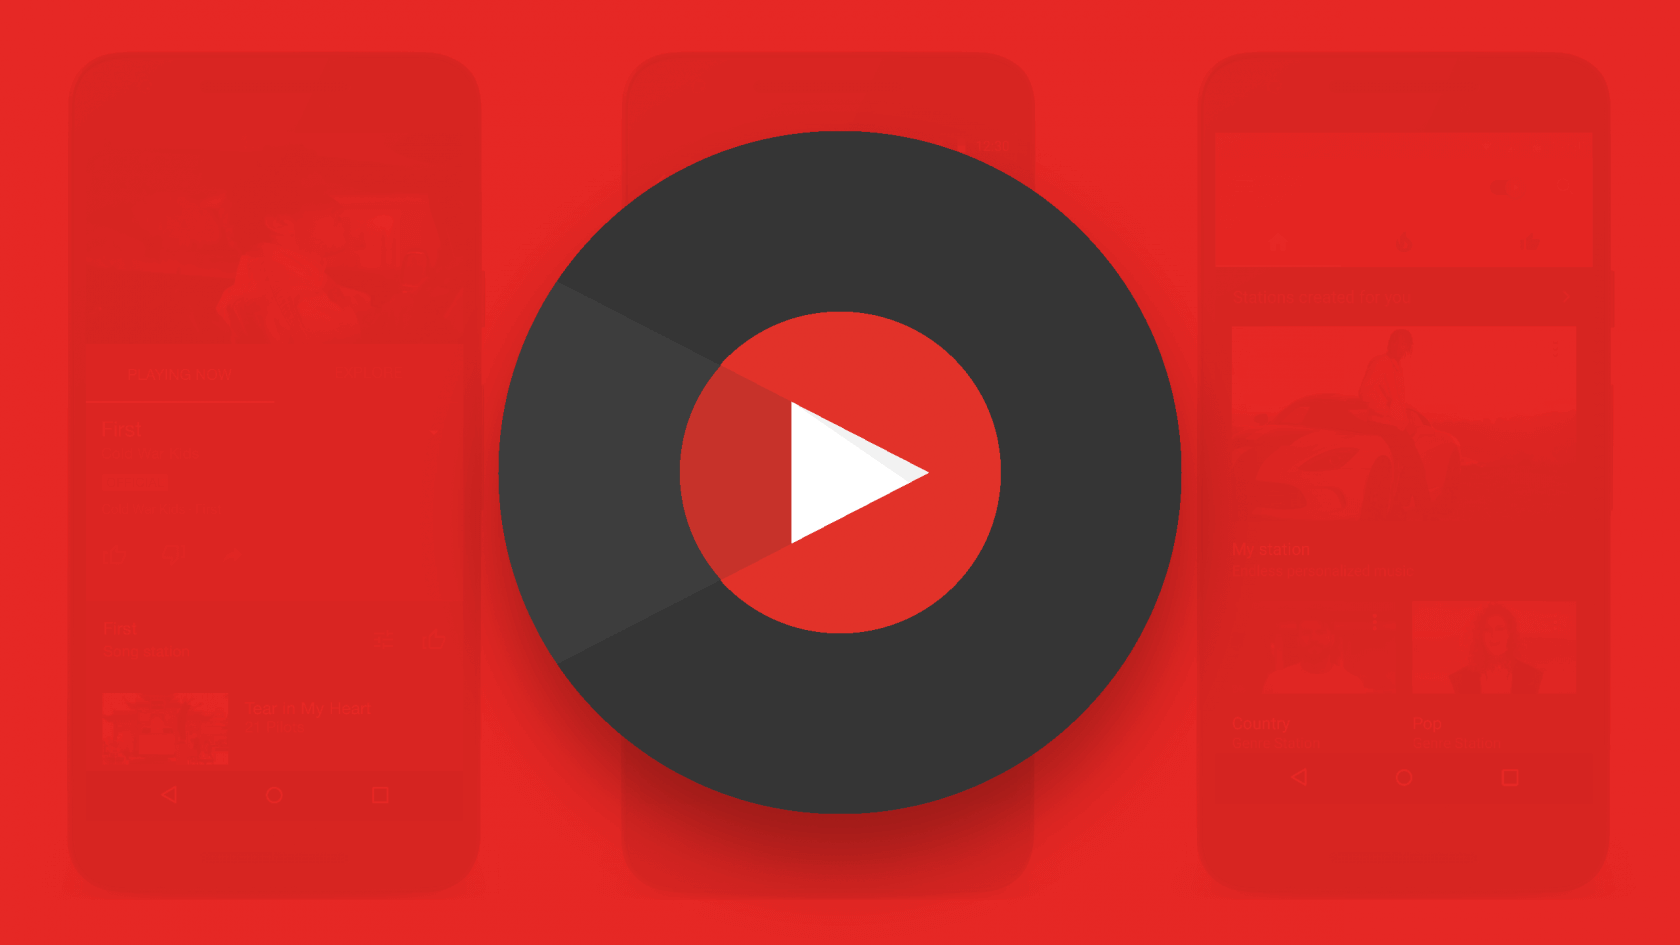 YouTube Music will come preinstalled on all new Android 10 devices